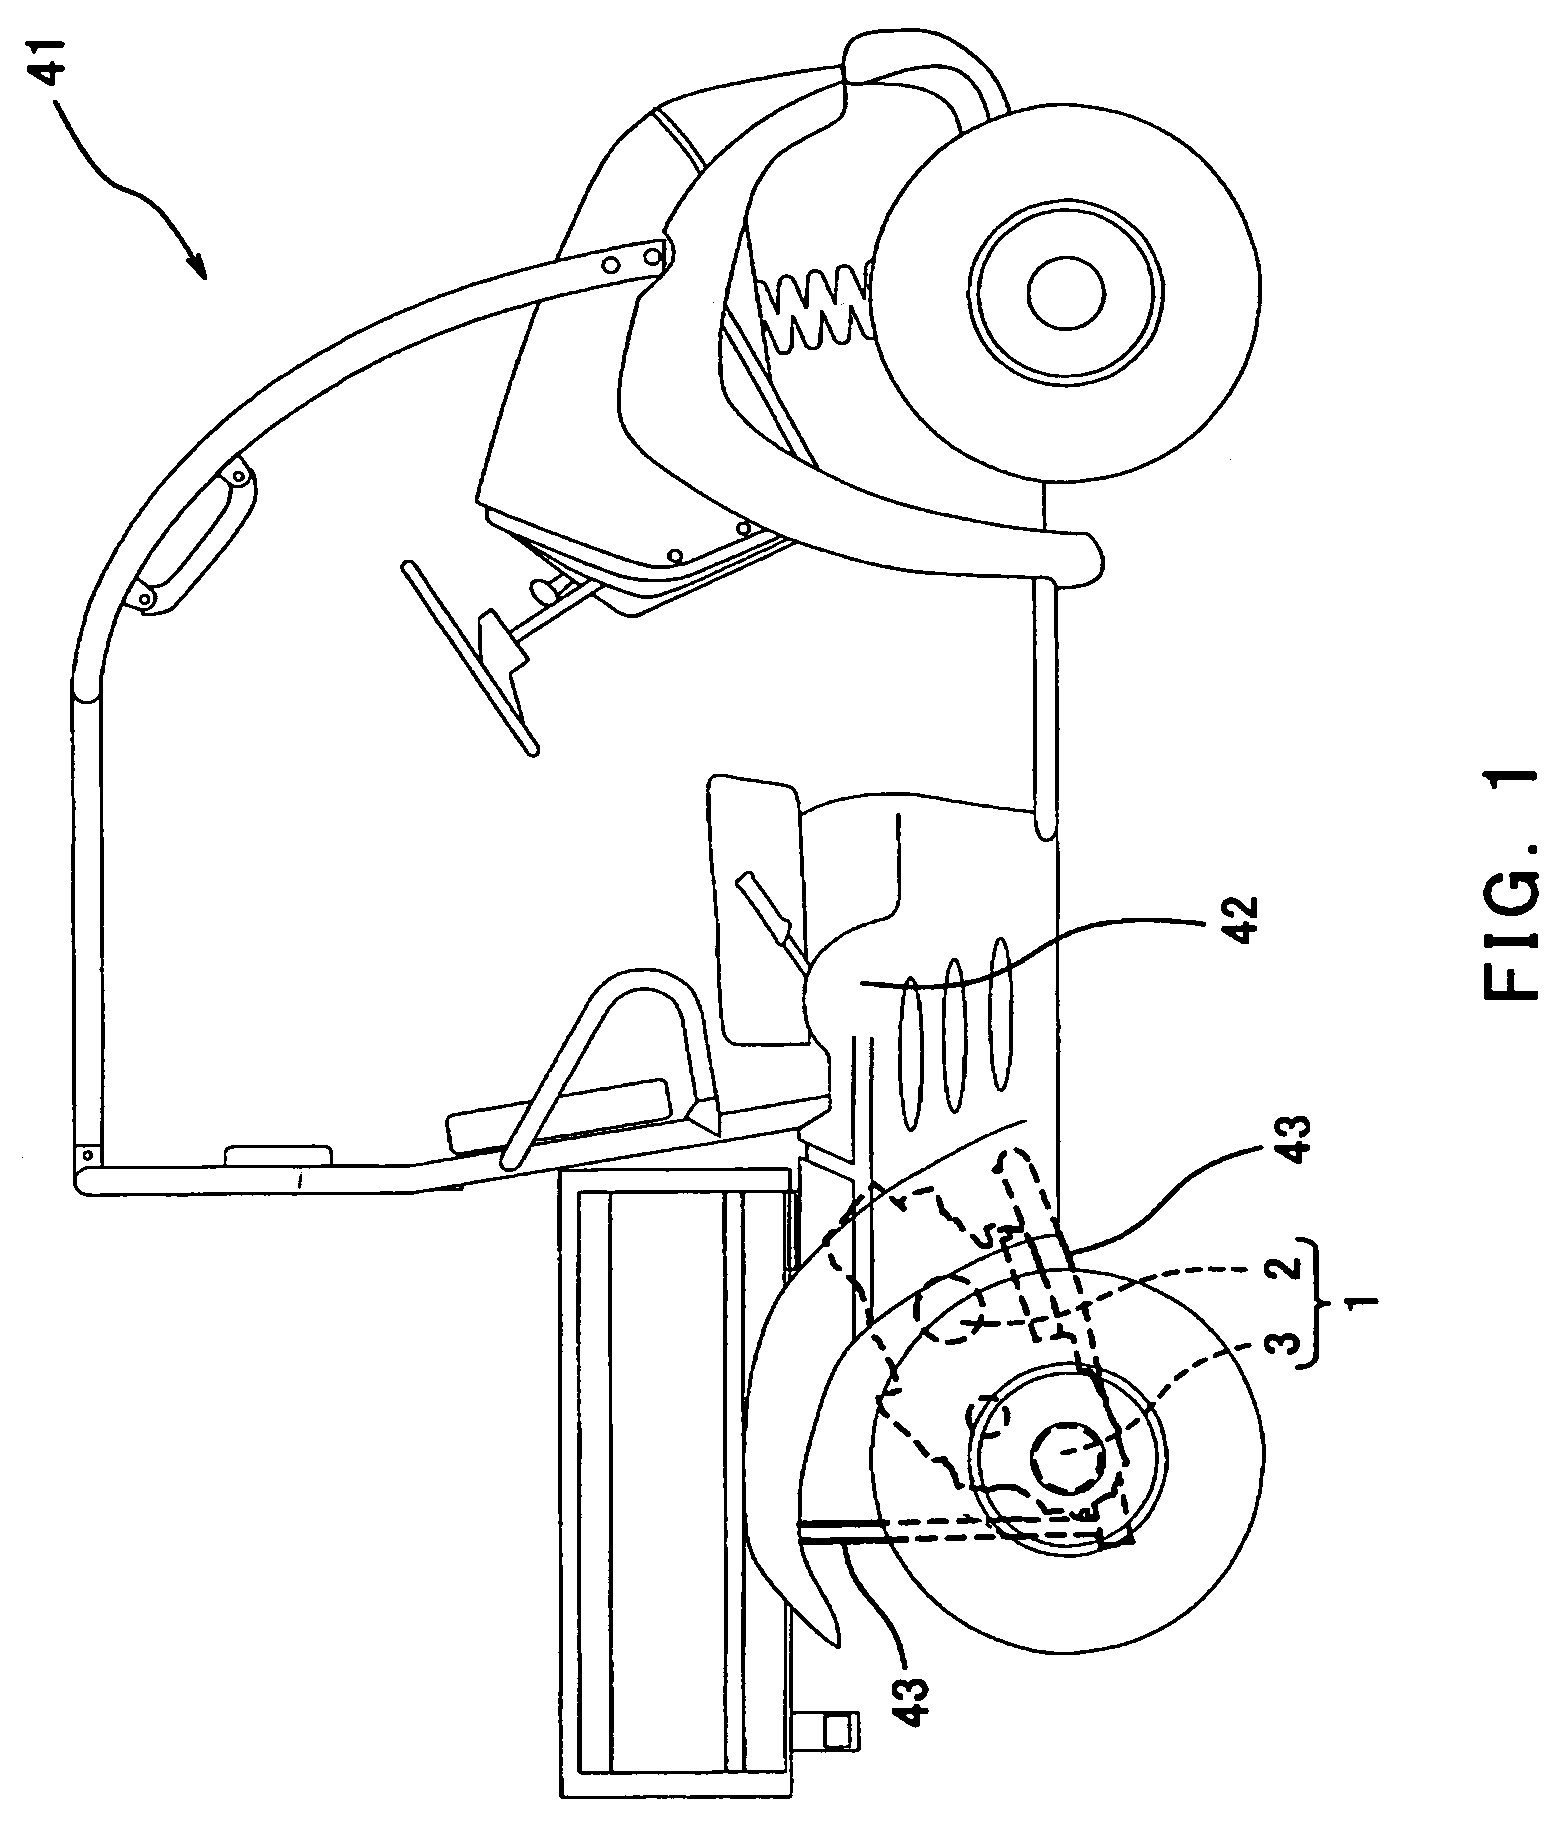 Utility vehicle and assembly of engine and transmission for utility vehicle